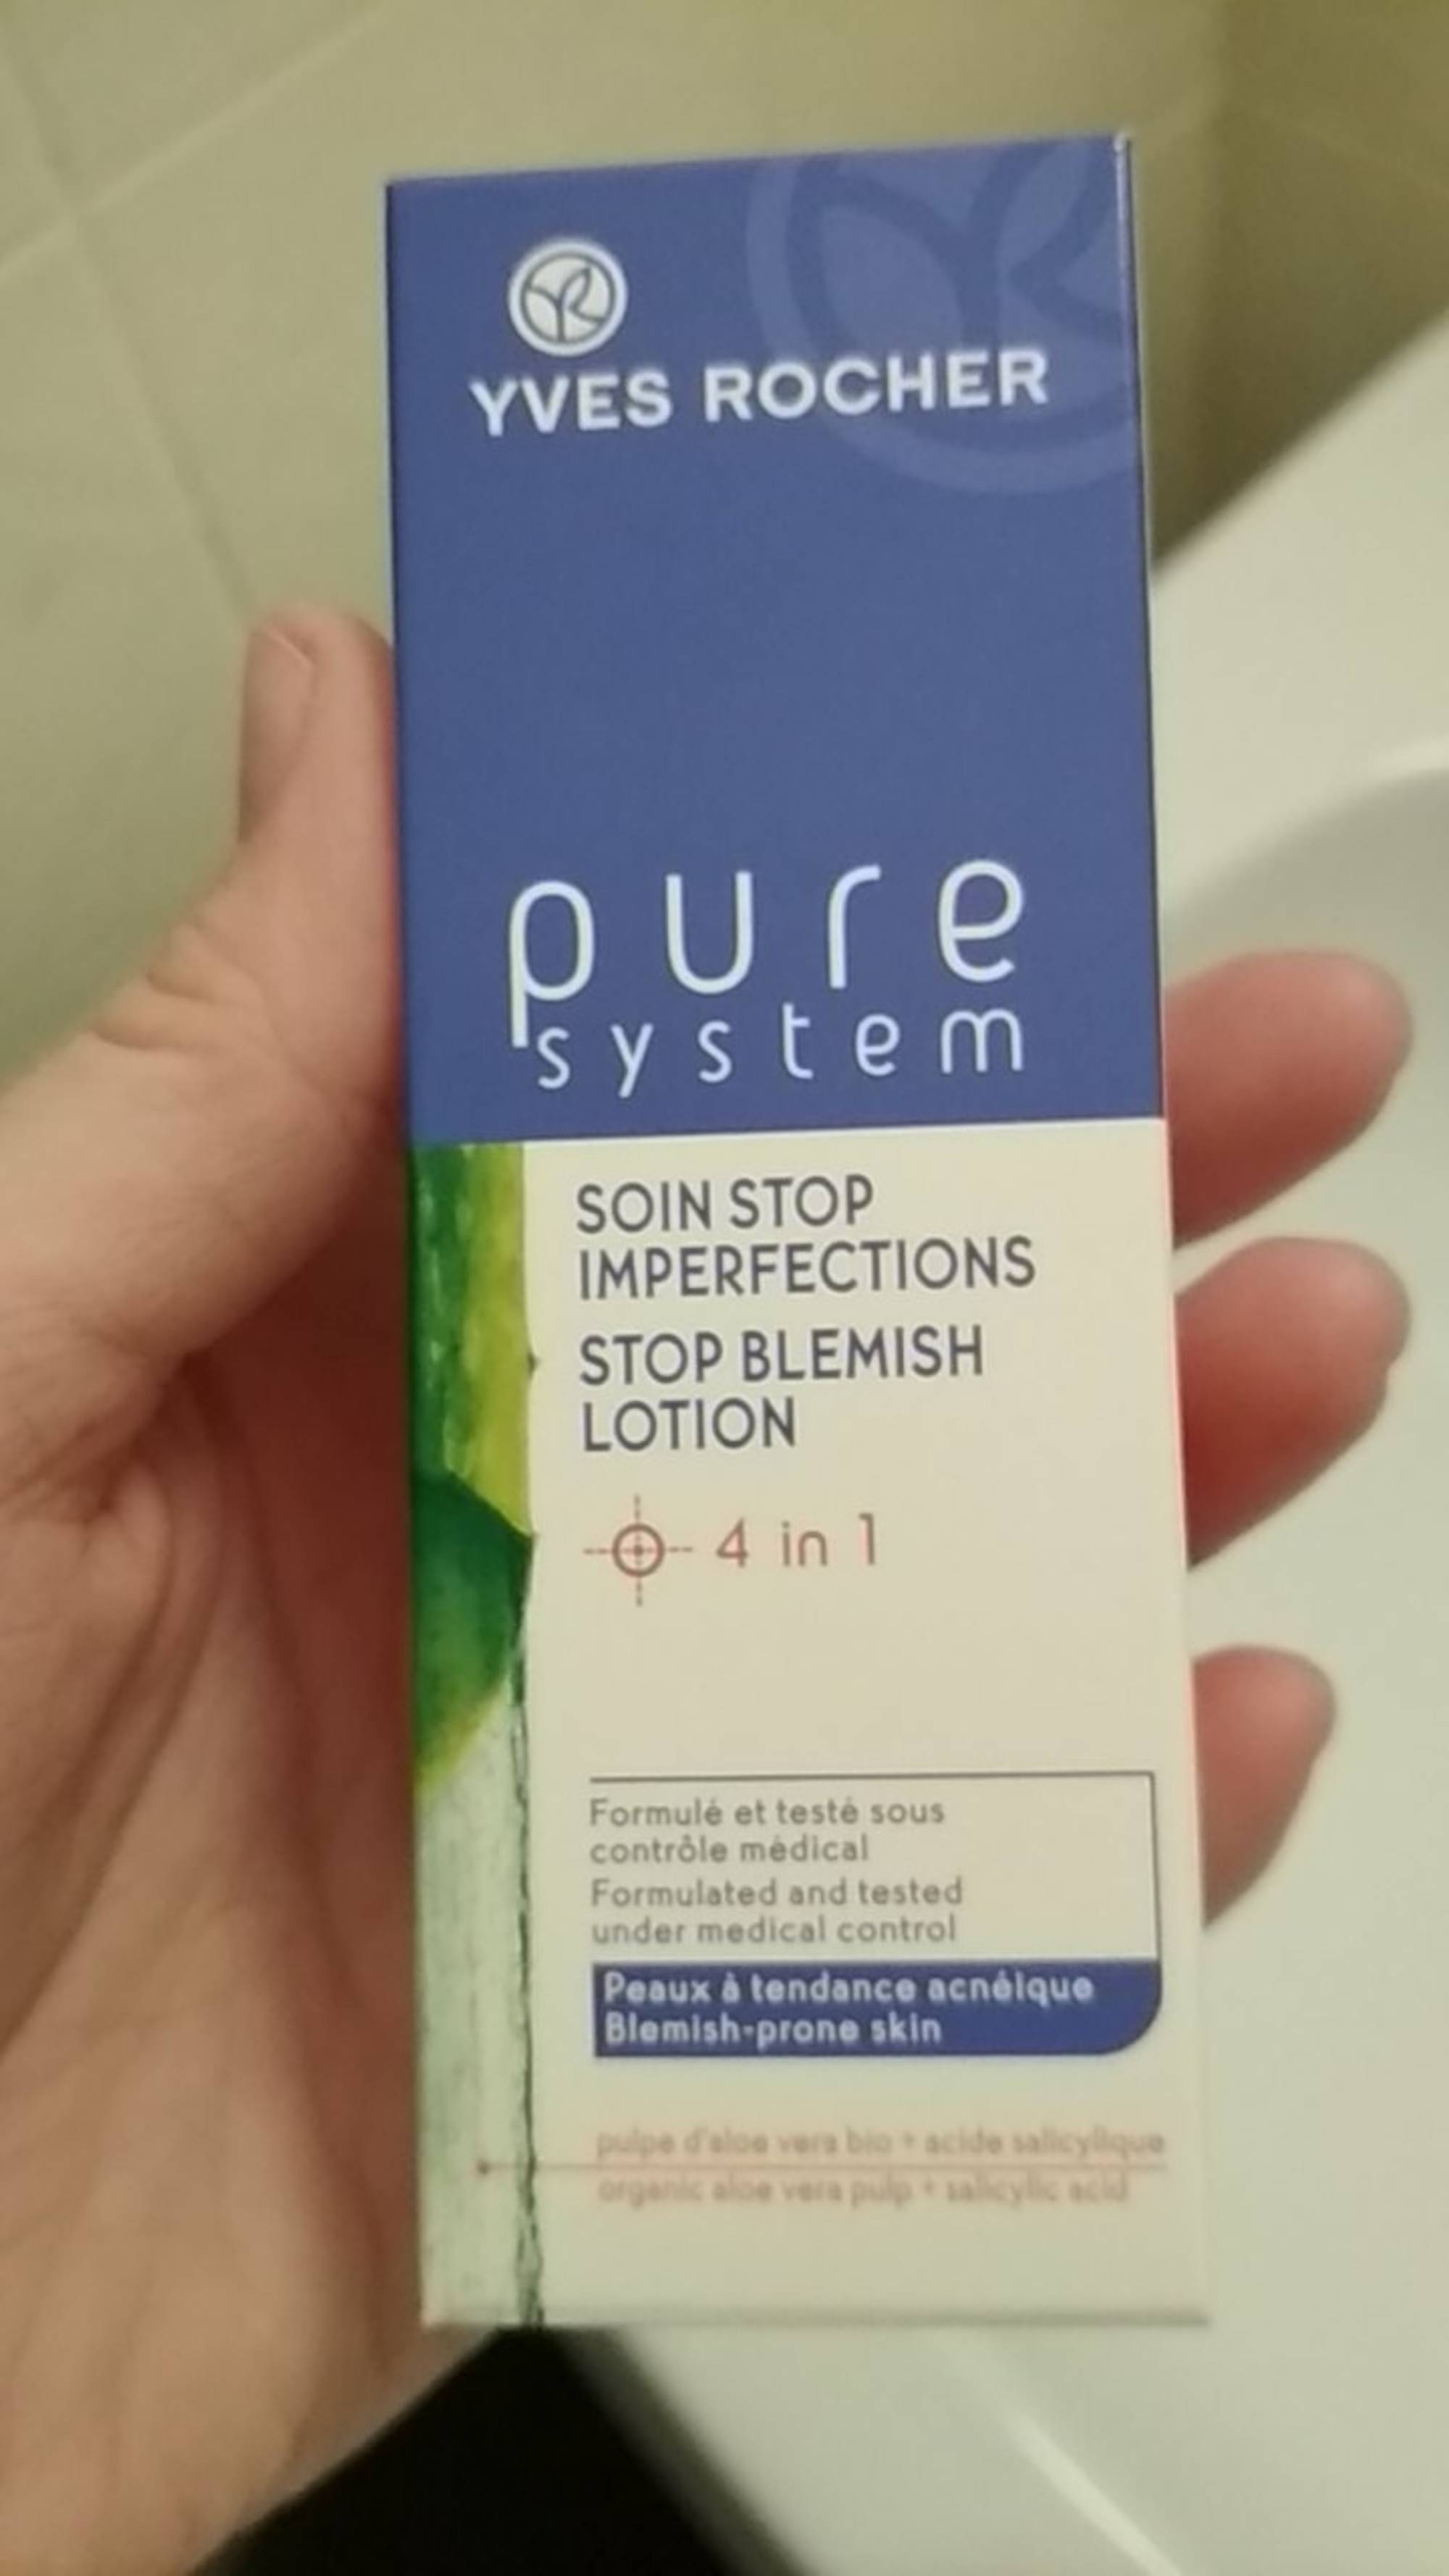 YVES ROCHER - Pure system - Soin stop imperfections 4 in 1